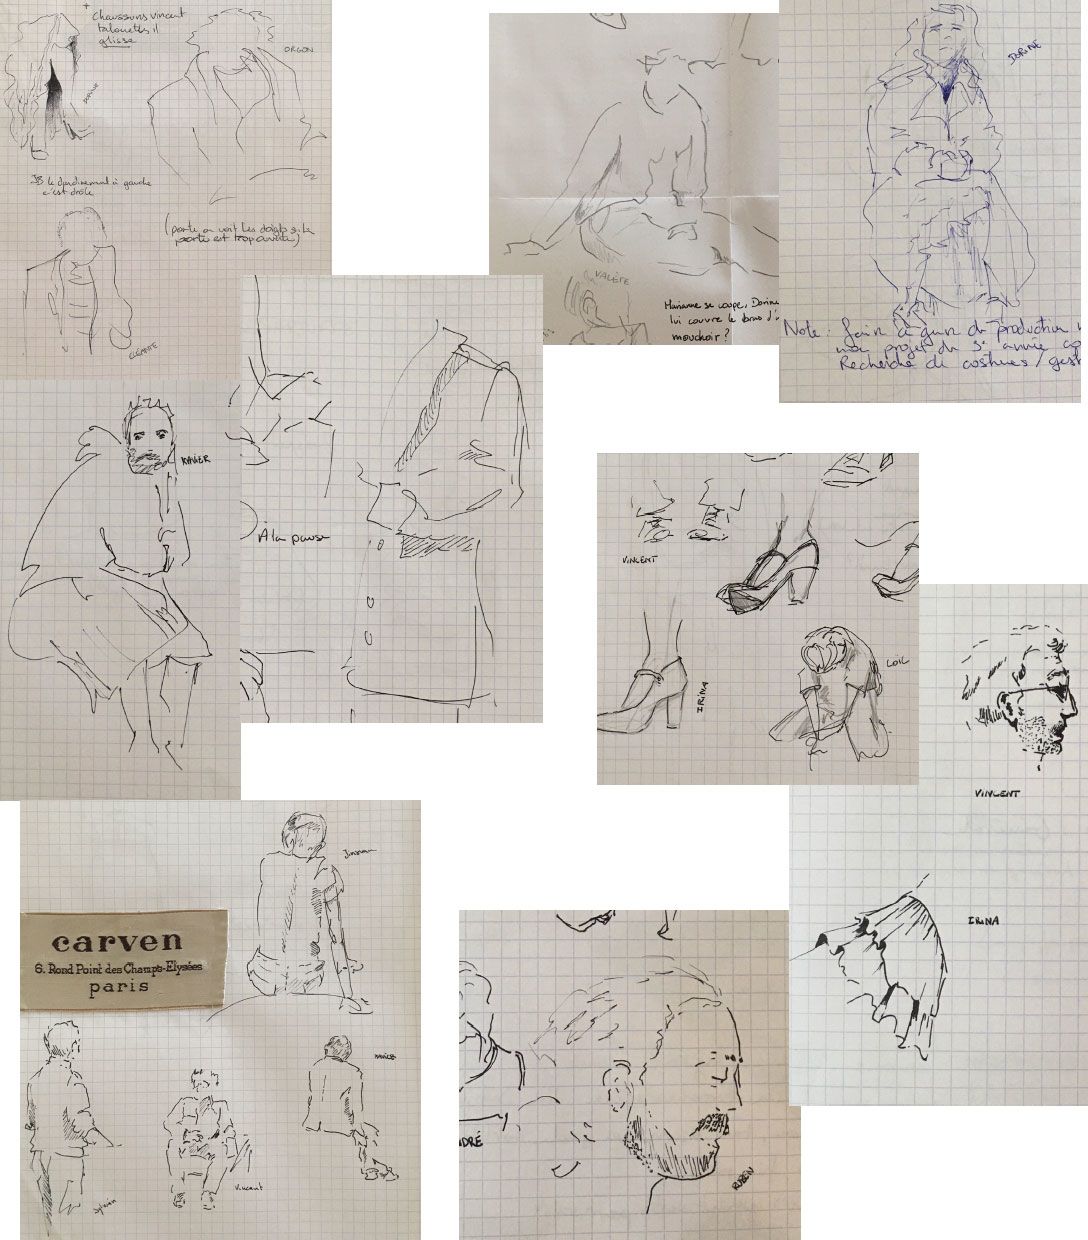 collage of rough sketches detailing the costume designs for 2 characters – 1 is a male and 1 is a female.